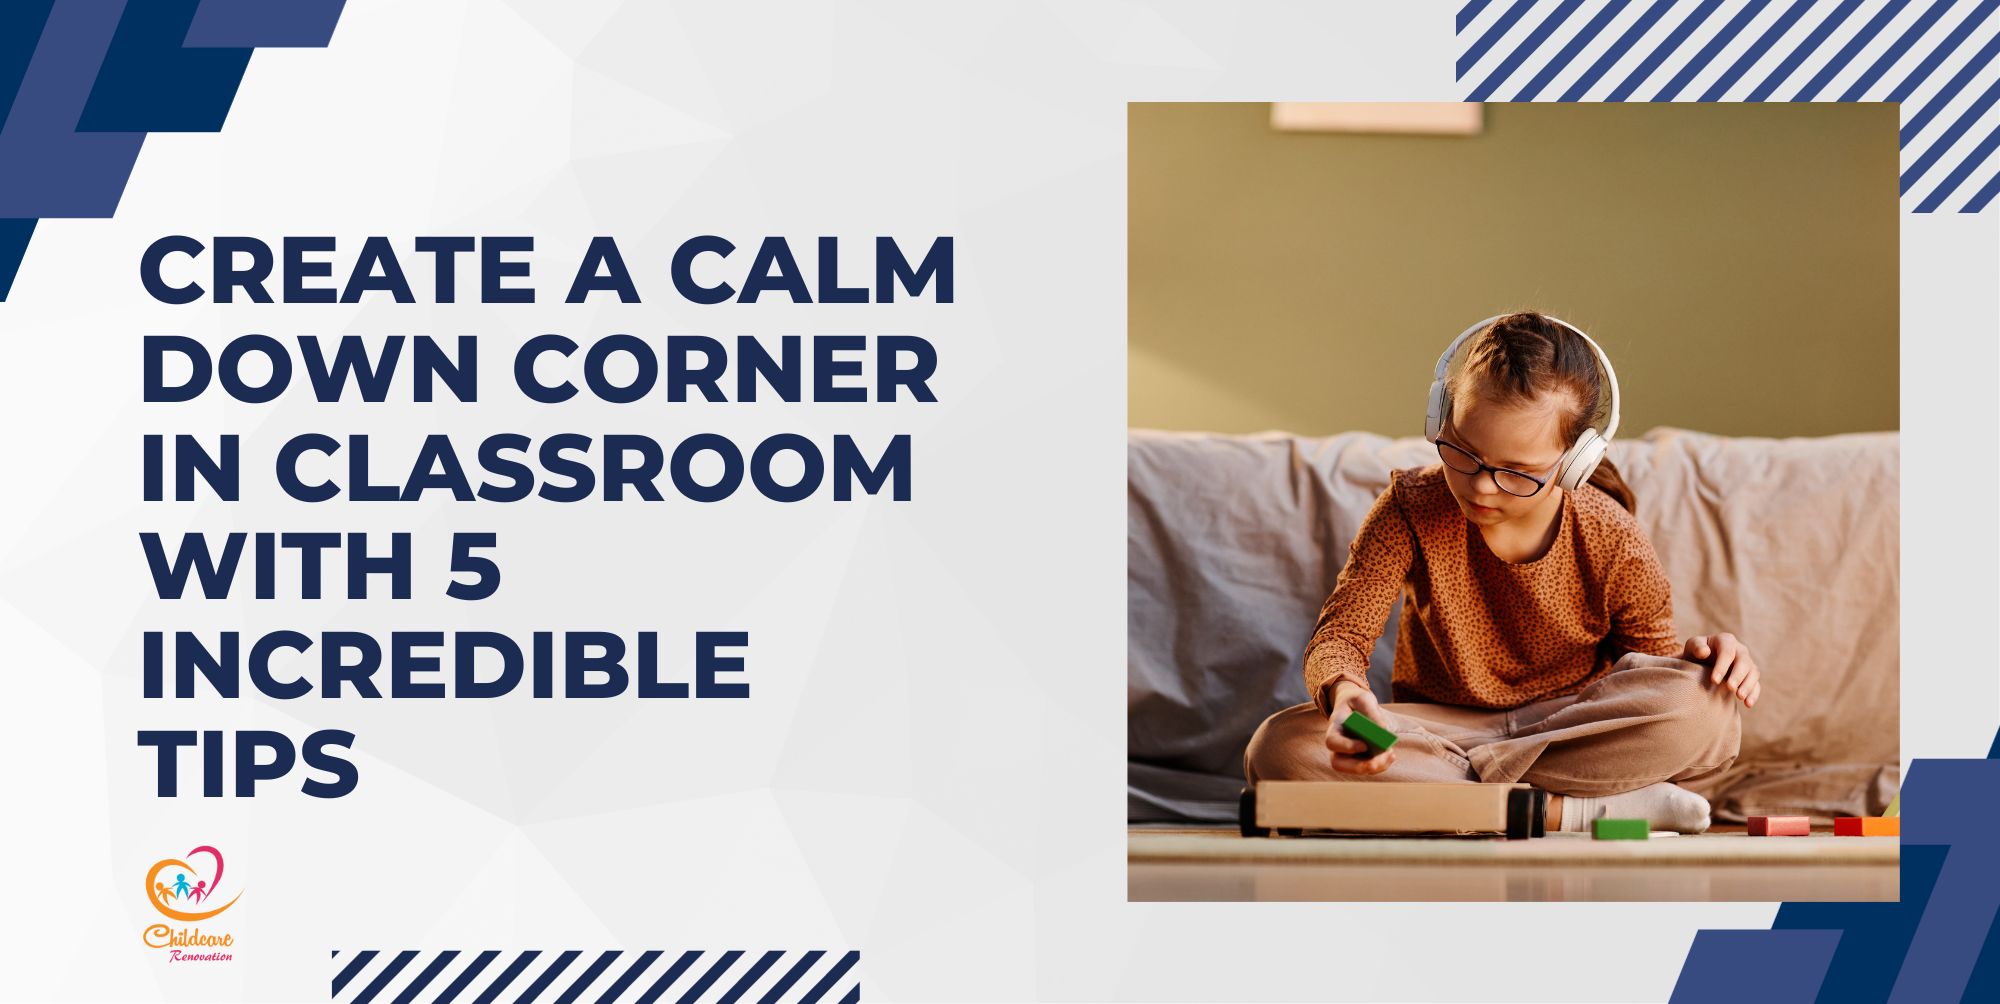 Create A Calm Down Corner In Classroom With 5 Incredible Tips